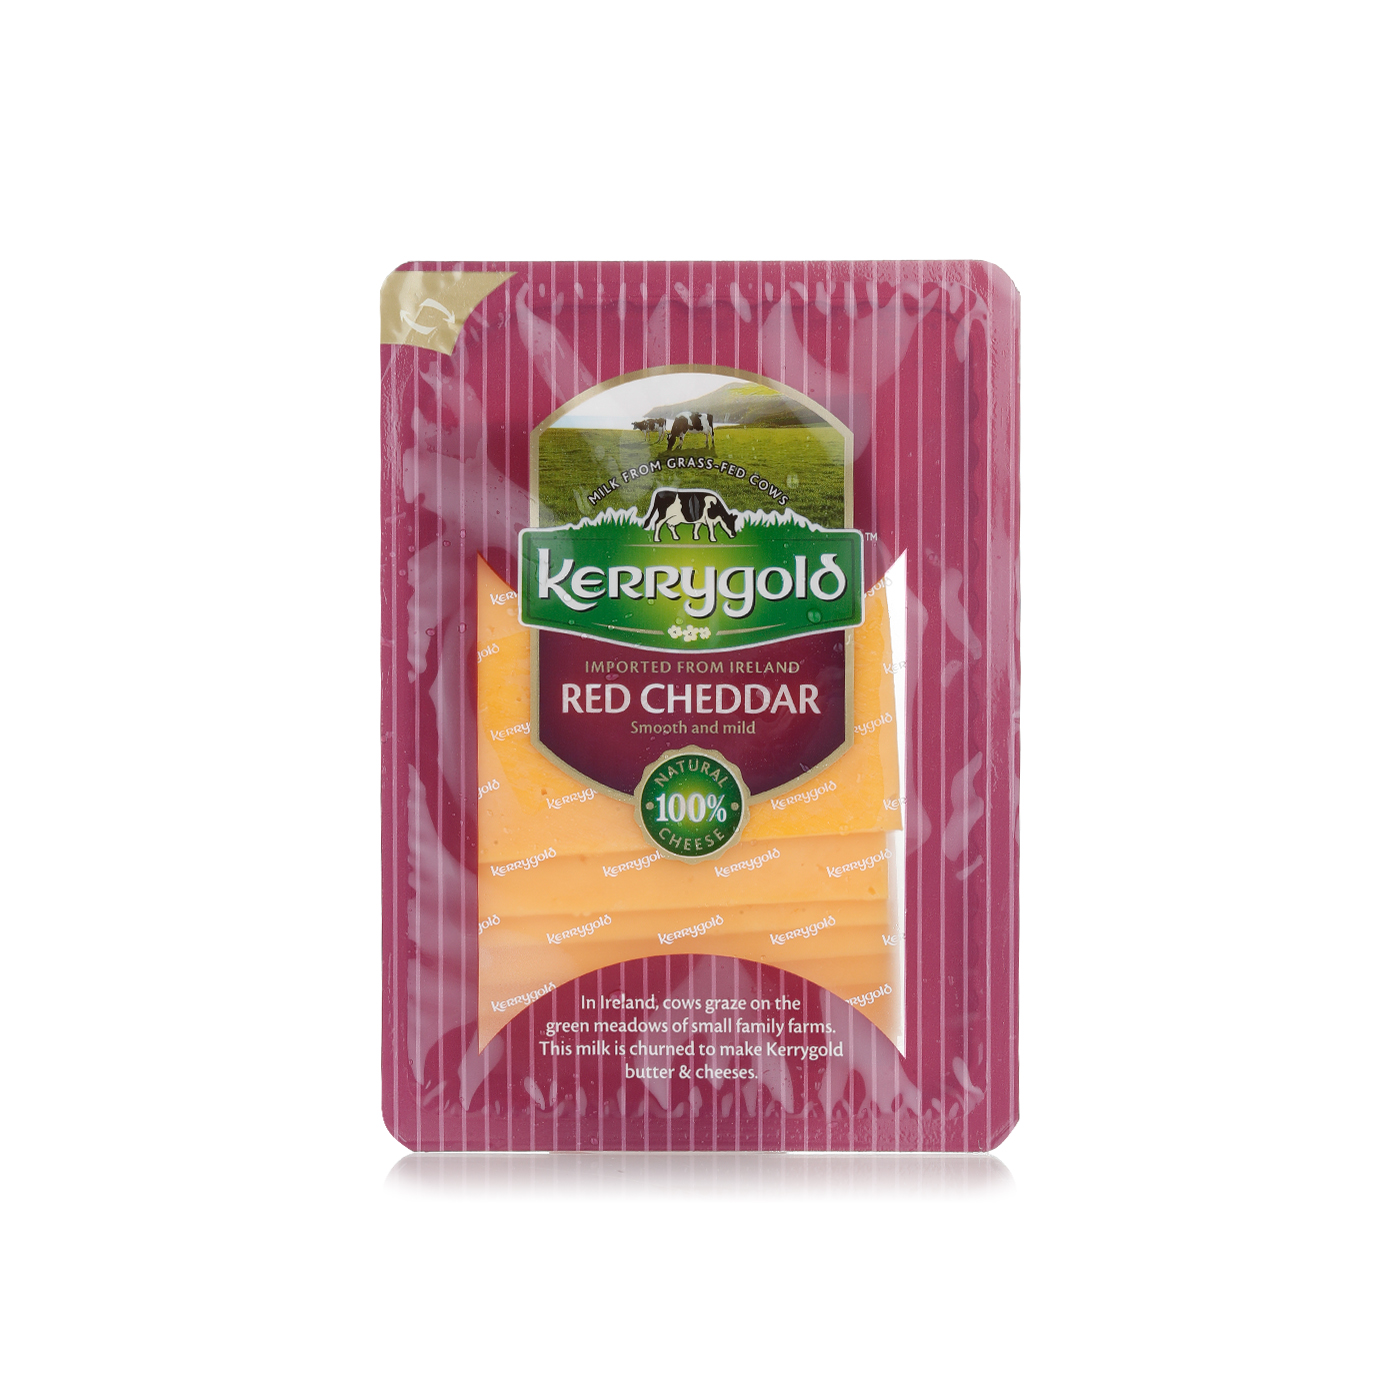 Kerrygold Red Cheddar Cheese Slice 150g Spinneys Uae 